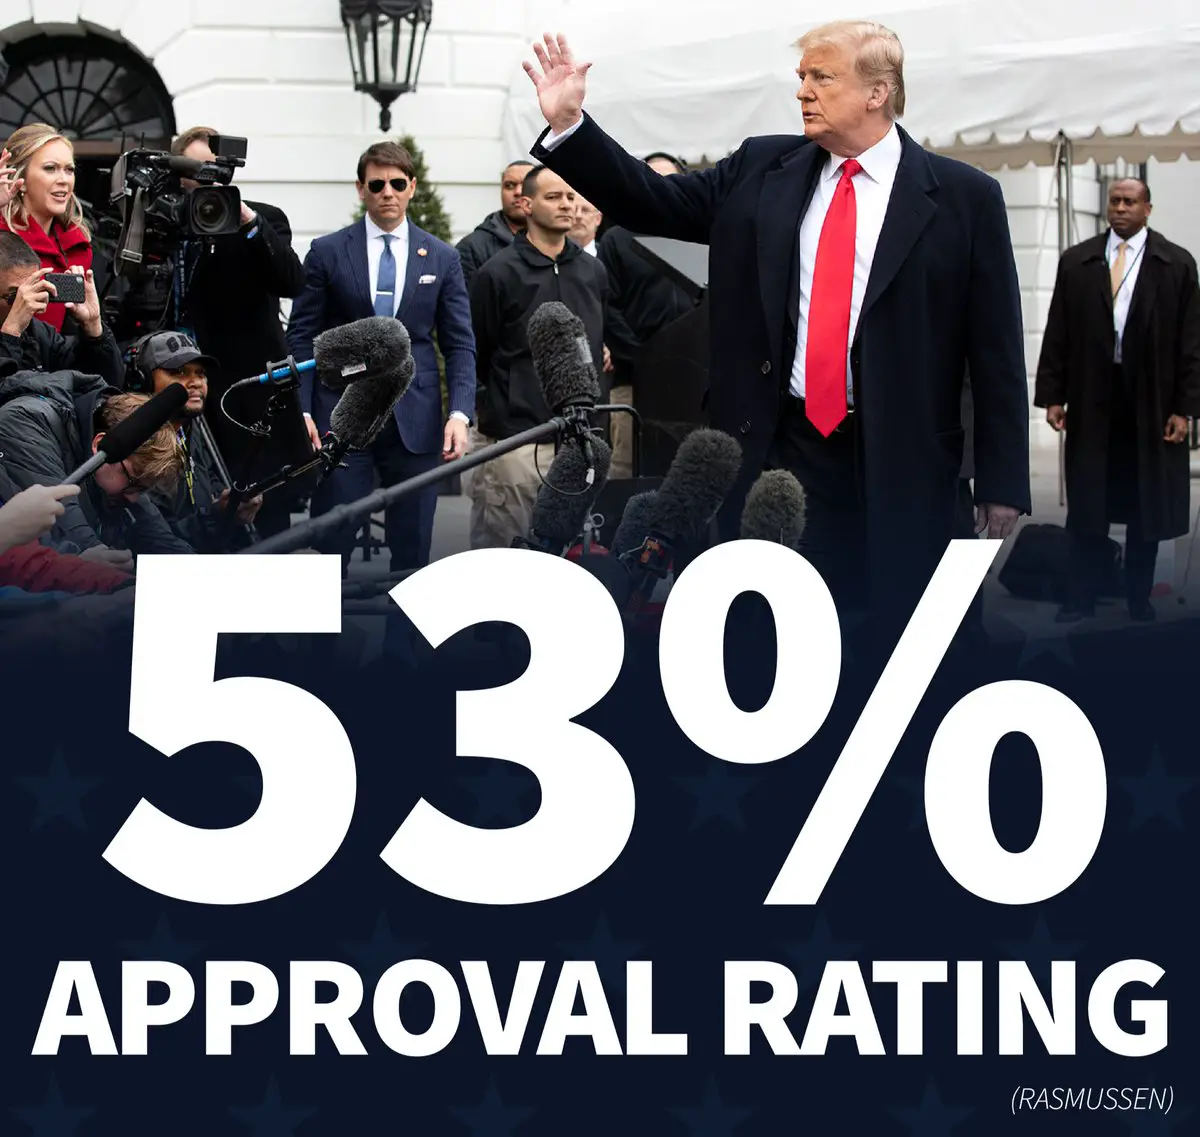 Trump Approval Rating Now Higher Than Barack Obama